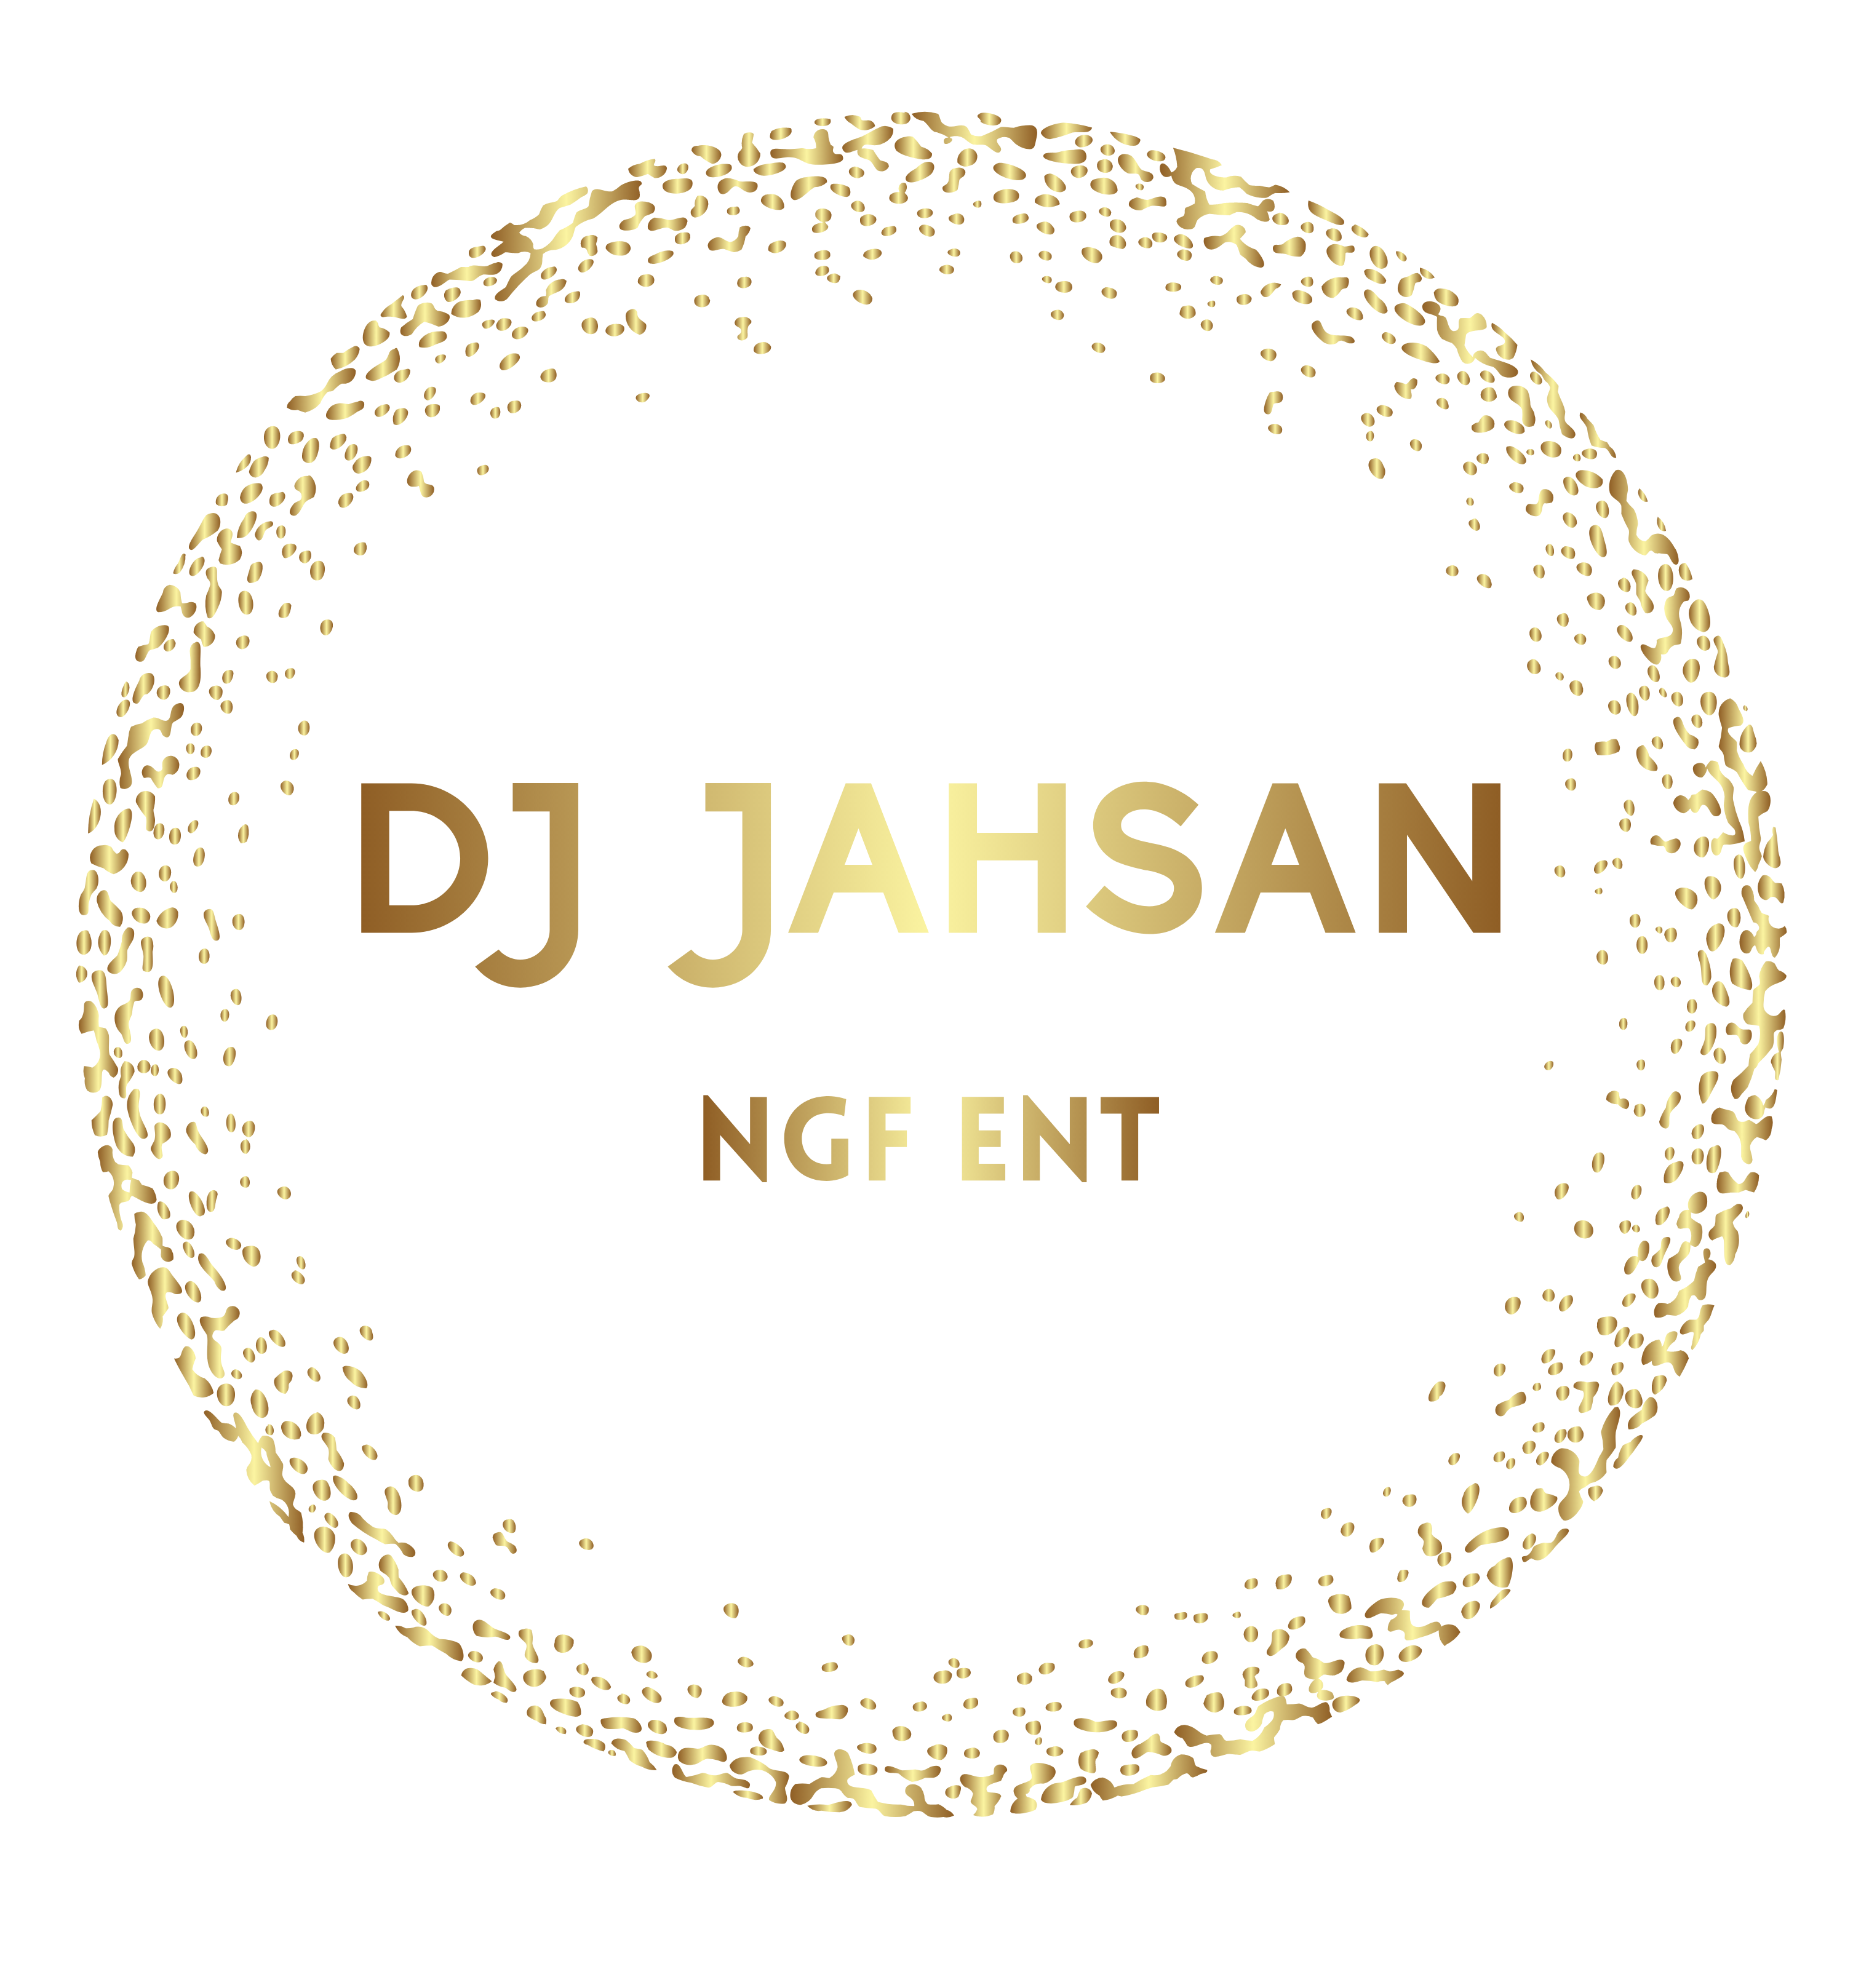 Art for 8/31  by NGF ENT (DJ Jahsan)